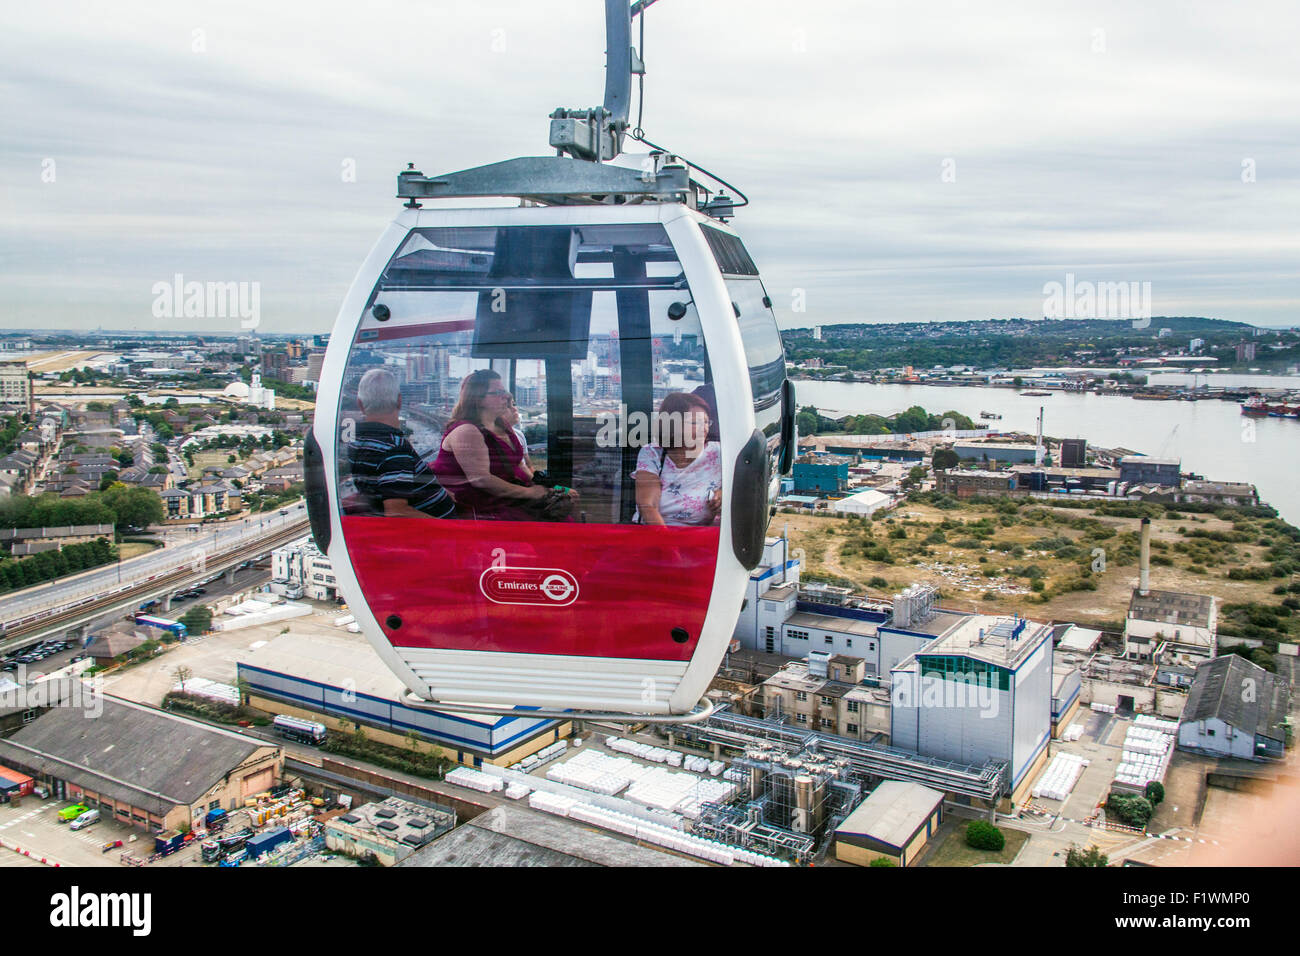 Emirates Air Line cable car across the River Thames from North Greenwich to Royal Victoria Dock, London, England, U.K Stock Photo